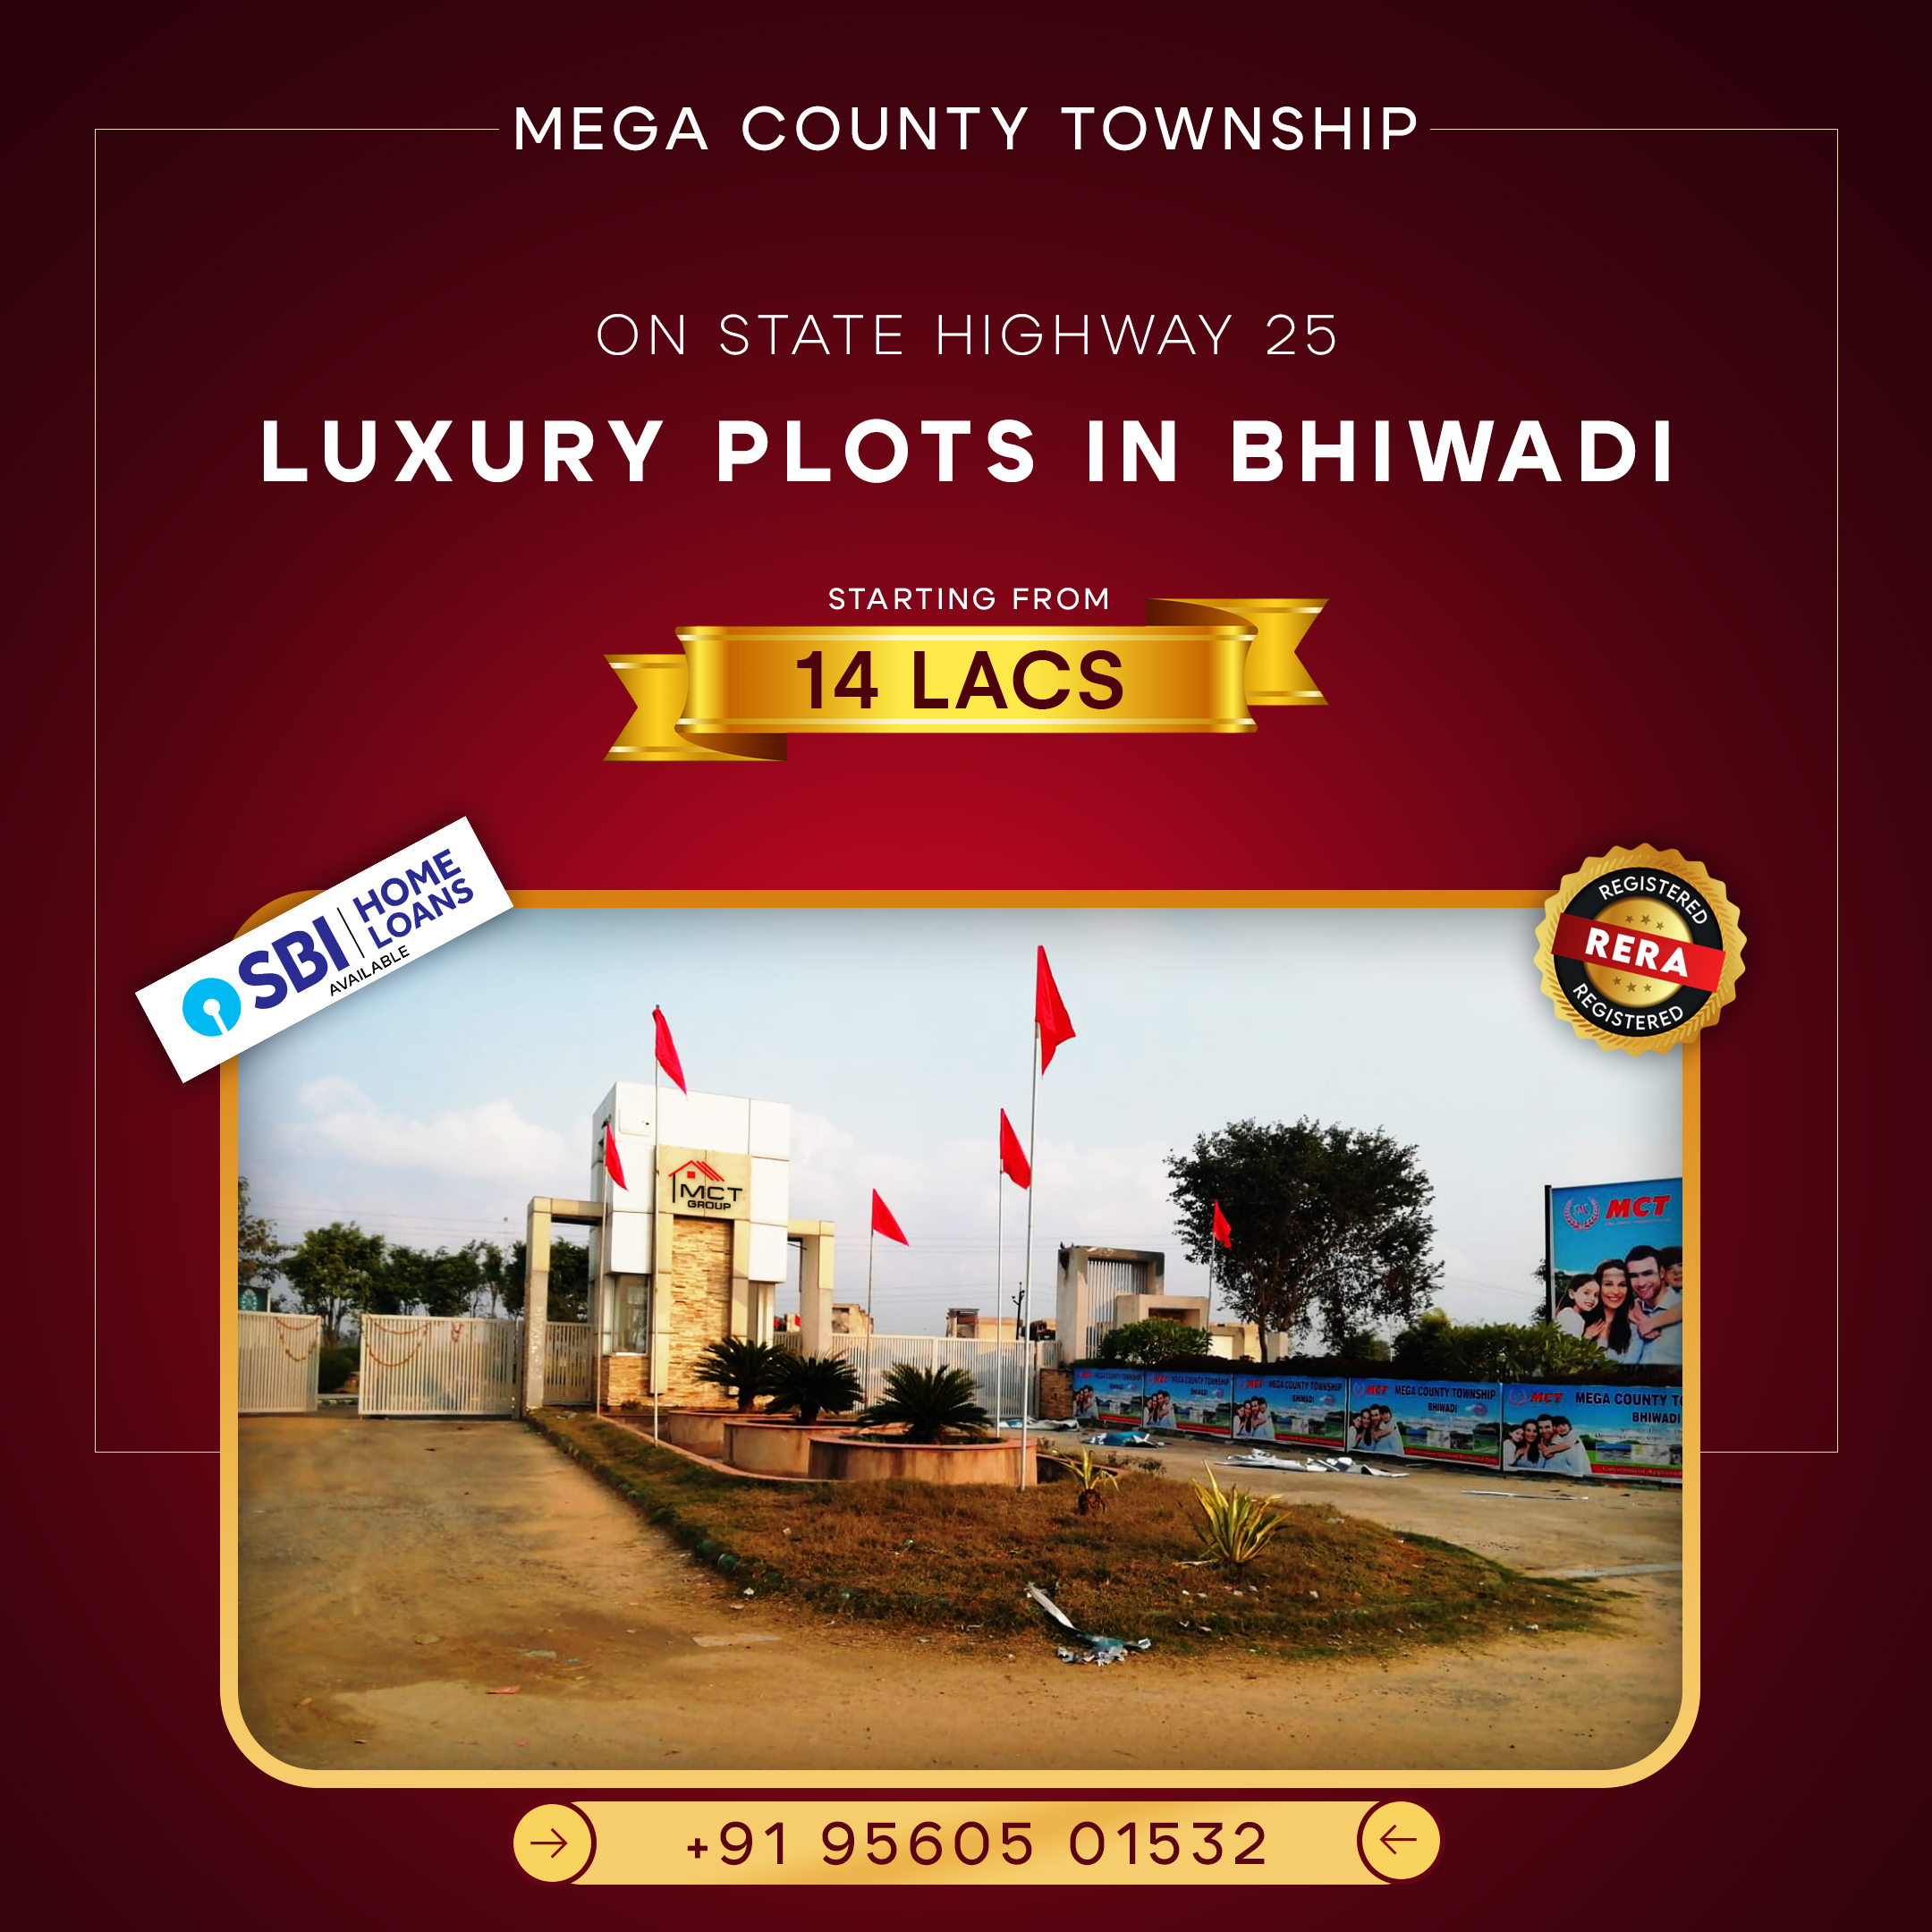 MEGA COUNTY TOWNSHIP

ON STATE HIGHWAY 25

LUXURY PLOTS IN BHIWADI

STARTING FROM Sd

   
   

TTI)
2)

— Eats 2 soscas =

>) +9195605 01532 (</